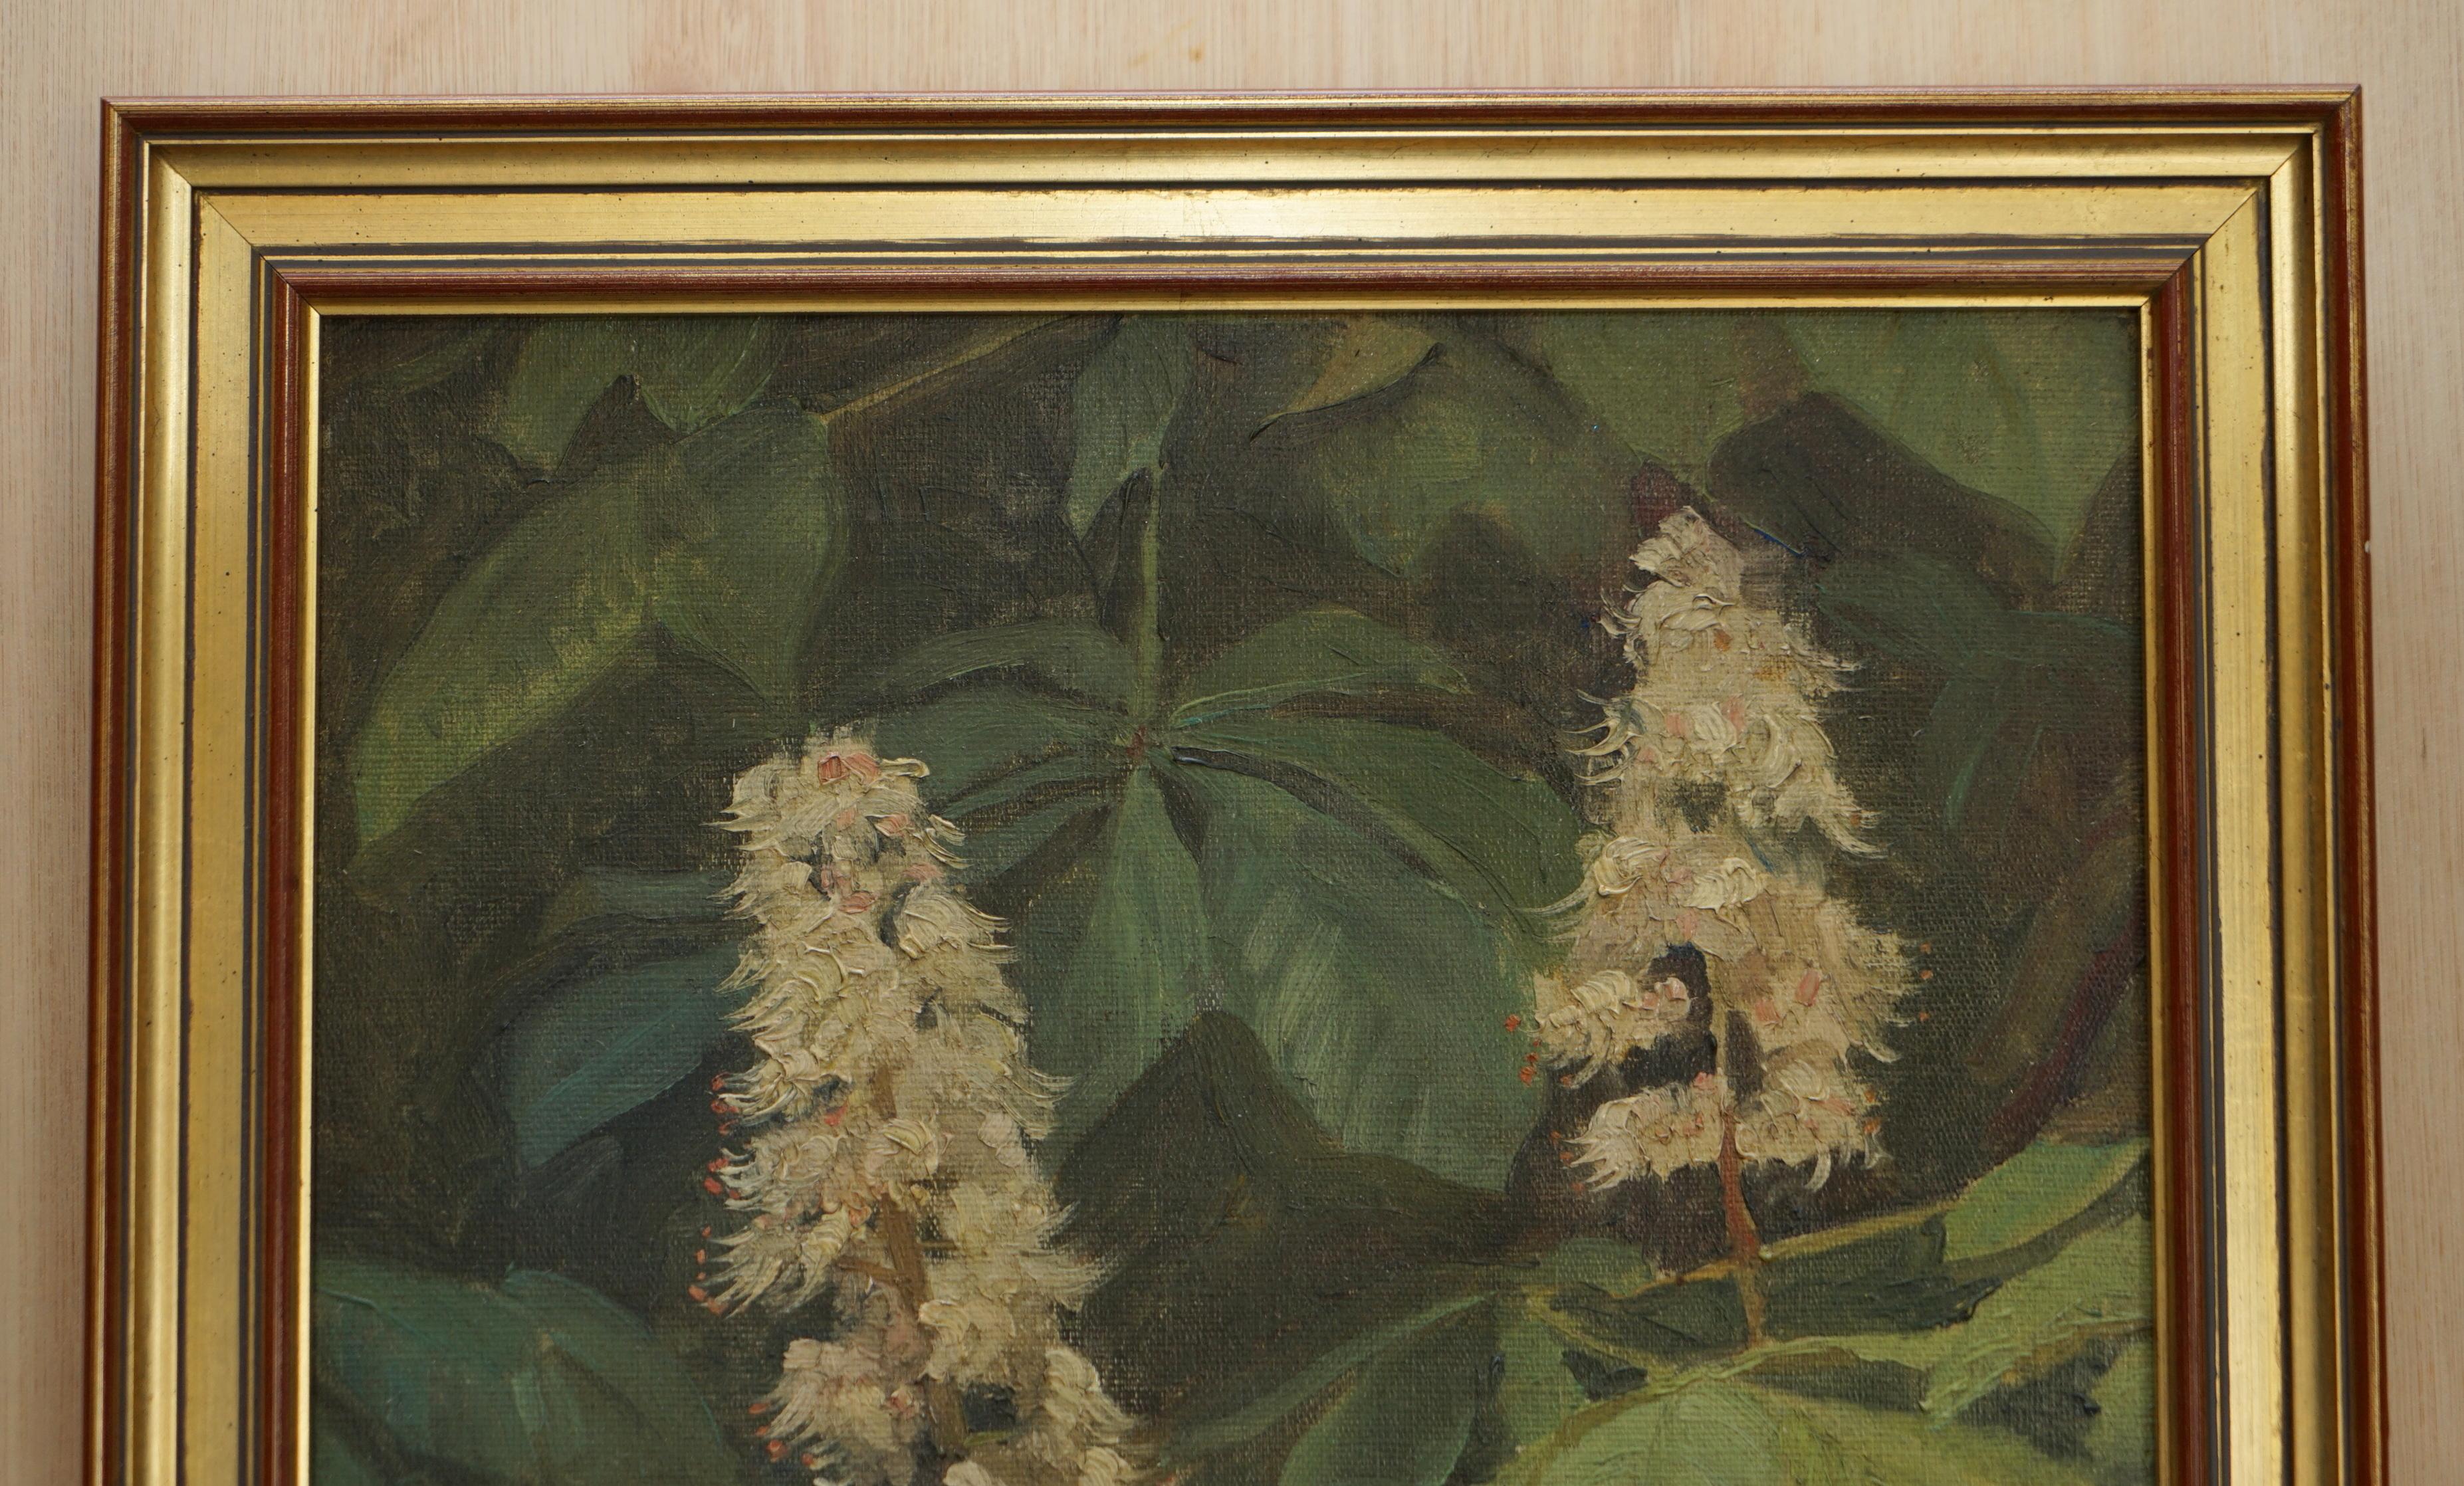 We are delighted to offer for sale this lovely hand made in England circa 1880-1900 oil painting of flowers in shrubbery signed E.Drvee 

A very good looking and decorative oil painting, this is a good medium size and really offers a window into